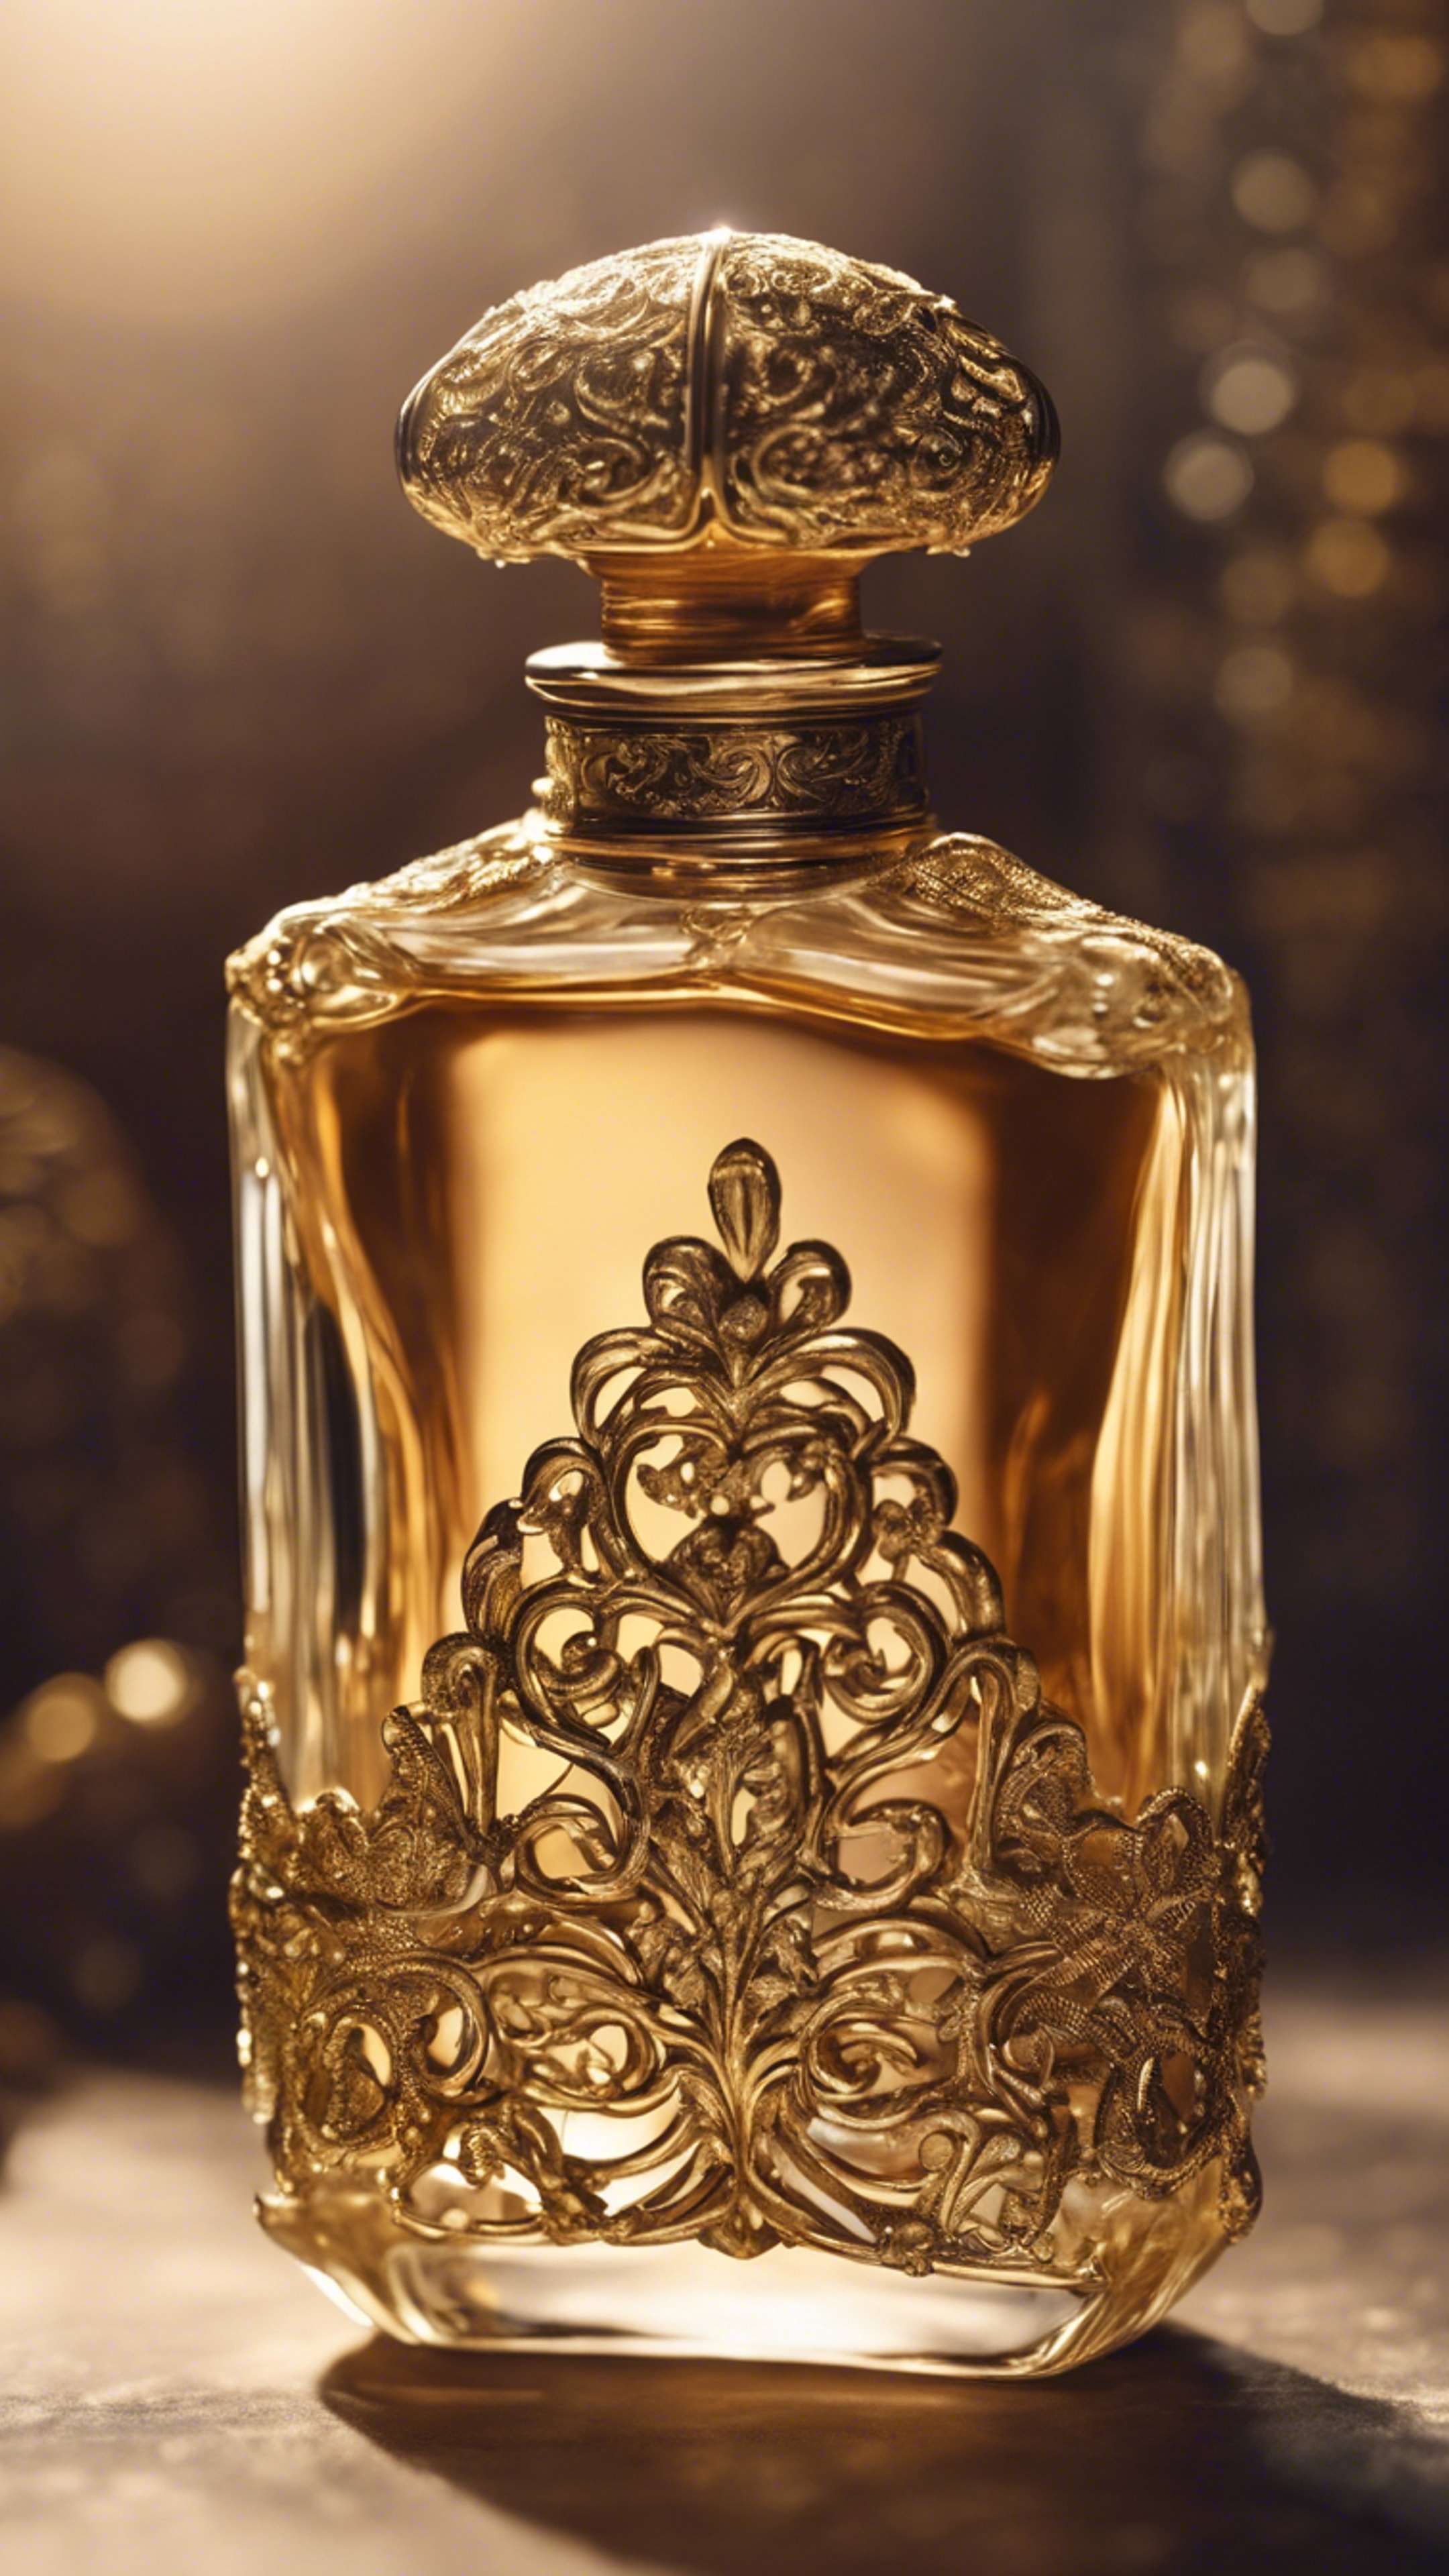 An antique perfume bottle with delicate gold filigree luxury cosmetic item. ورق الجدران[fe361f22190a4891a6d9]